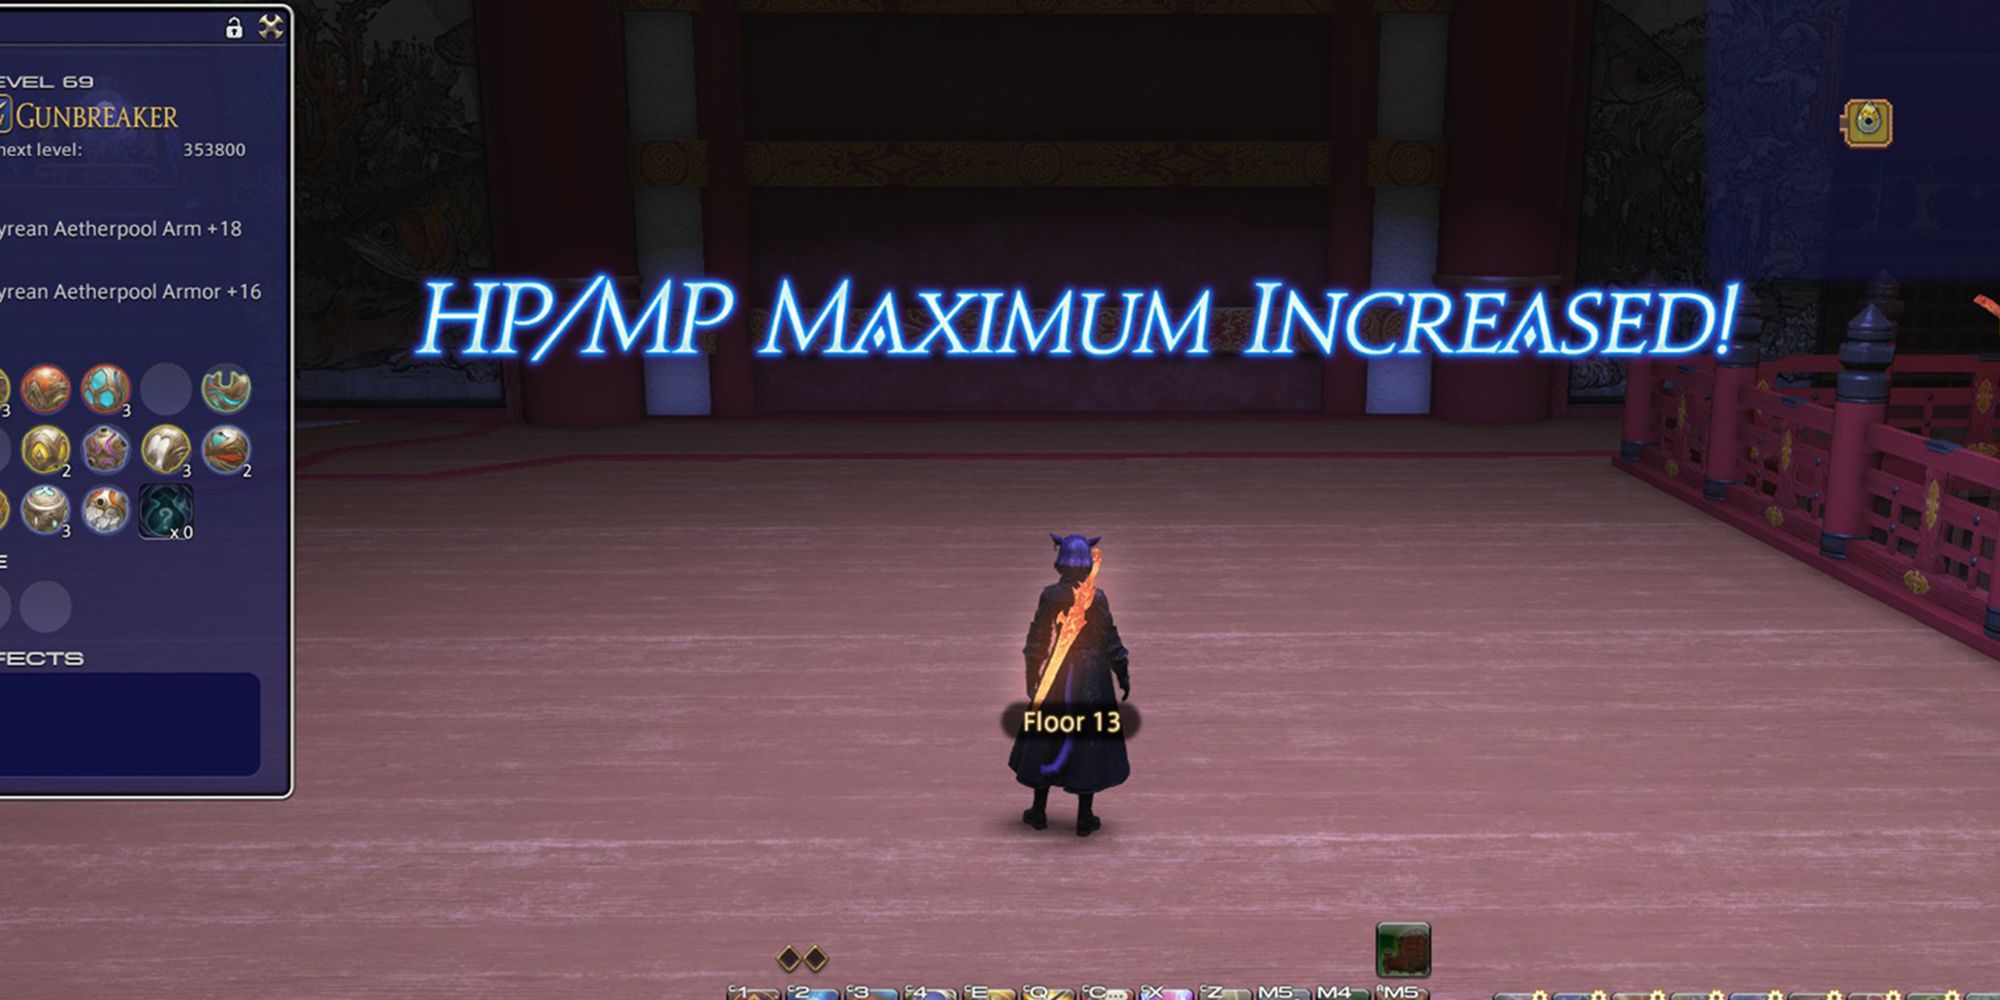 a beneficial floor enchantment being activated that increases hp/mp